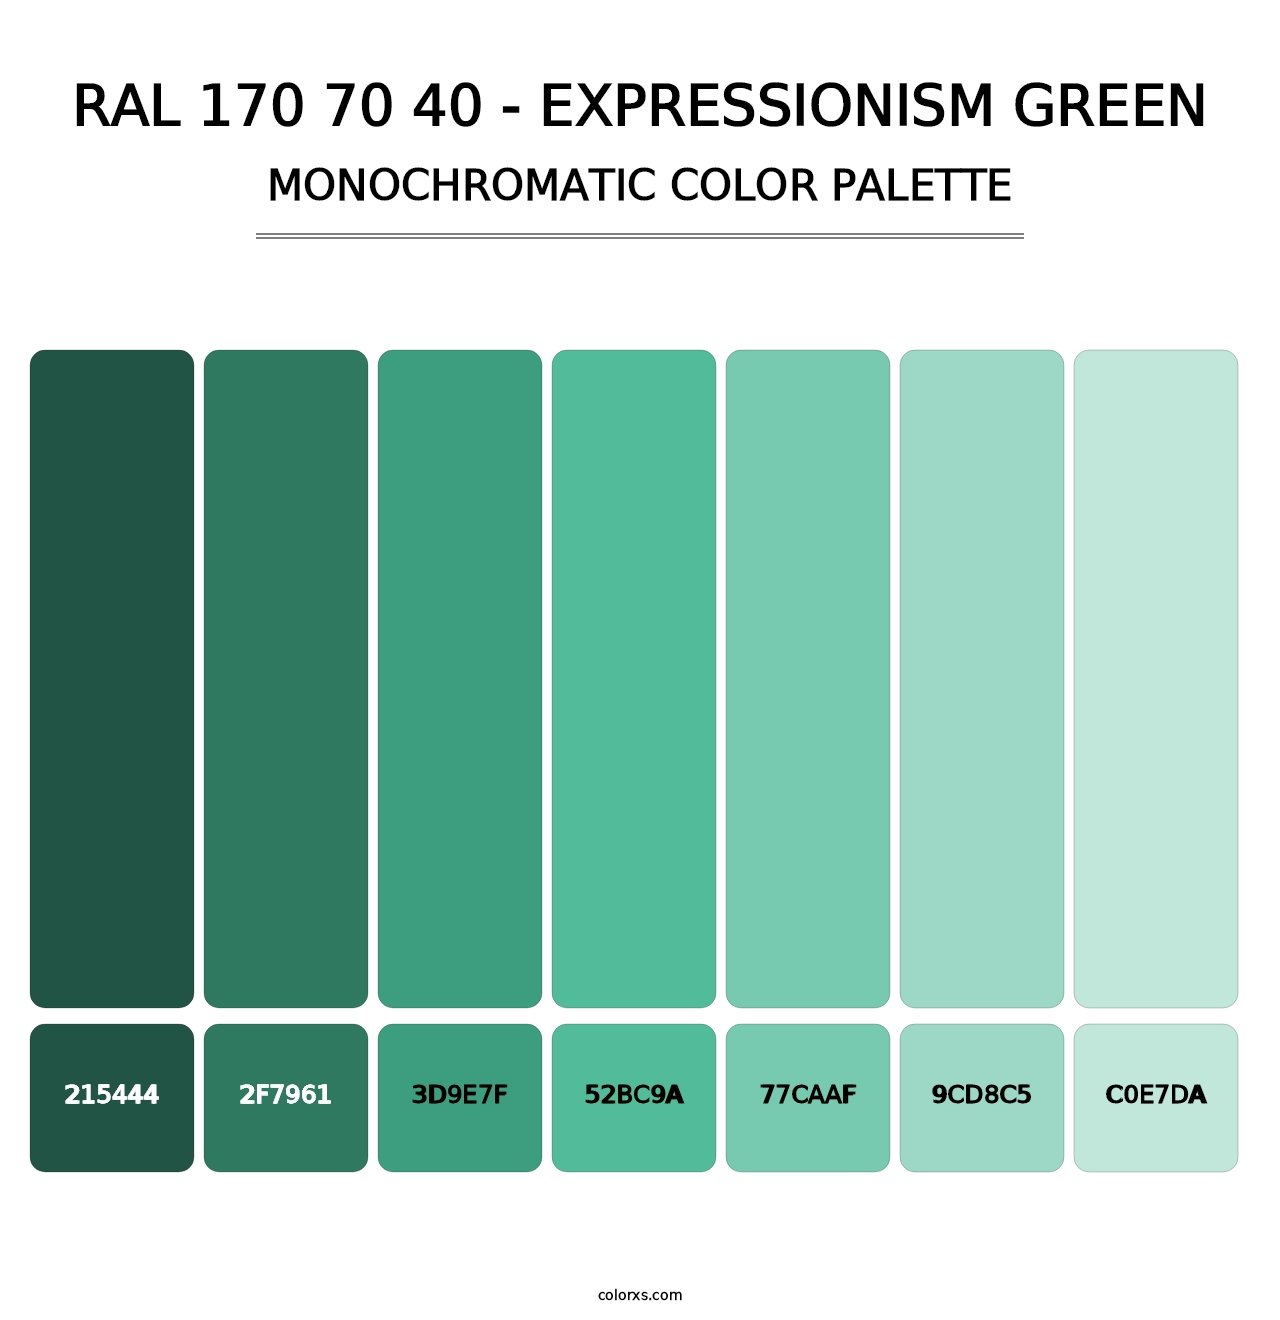 RAL 170 70 40 - Expressionism Green - Monochromatic Color Palette